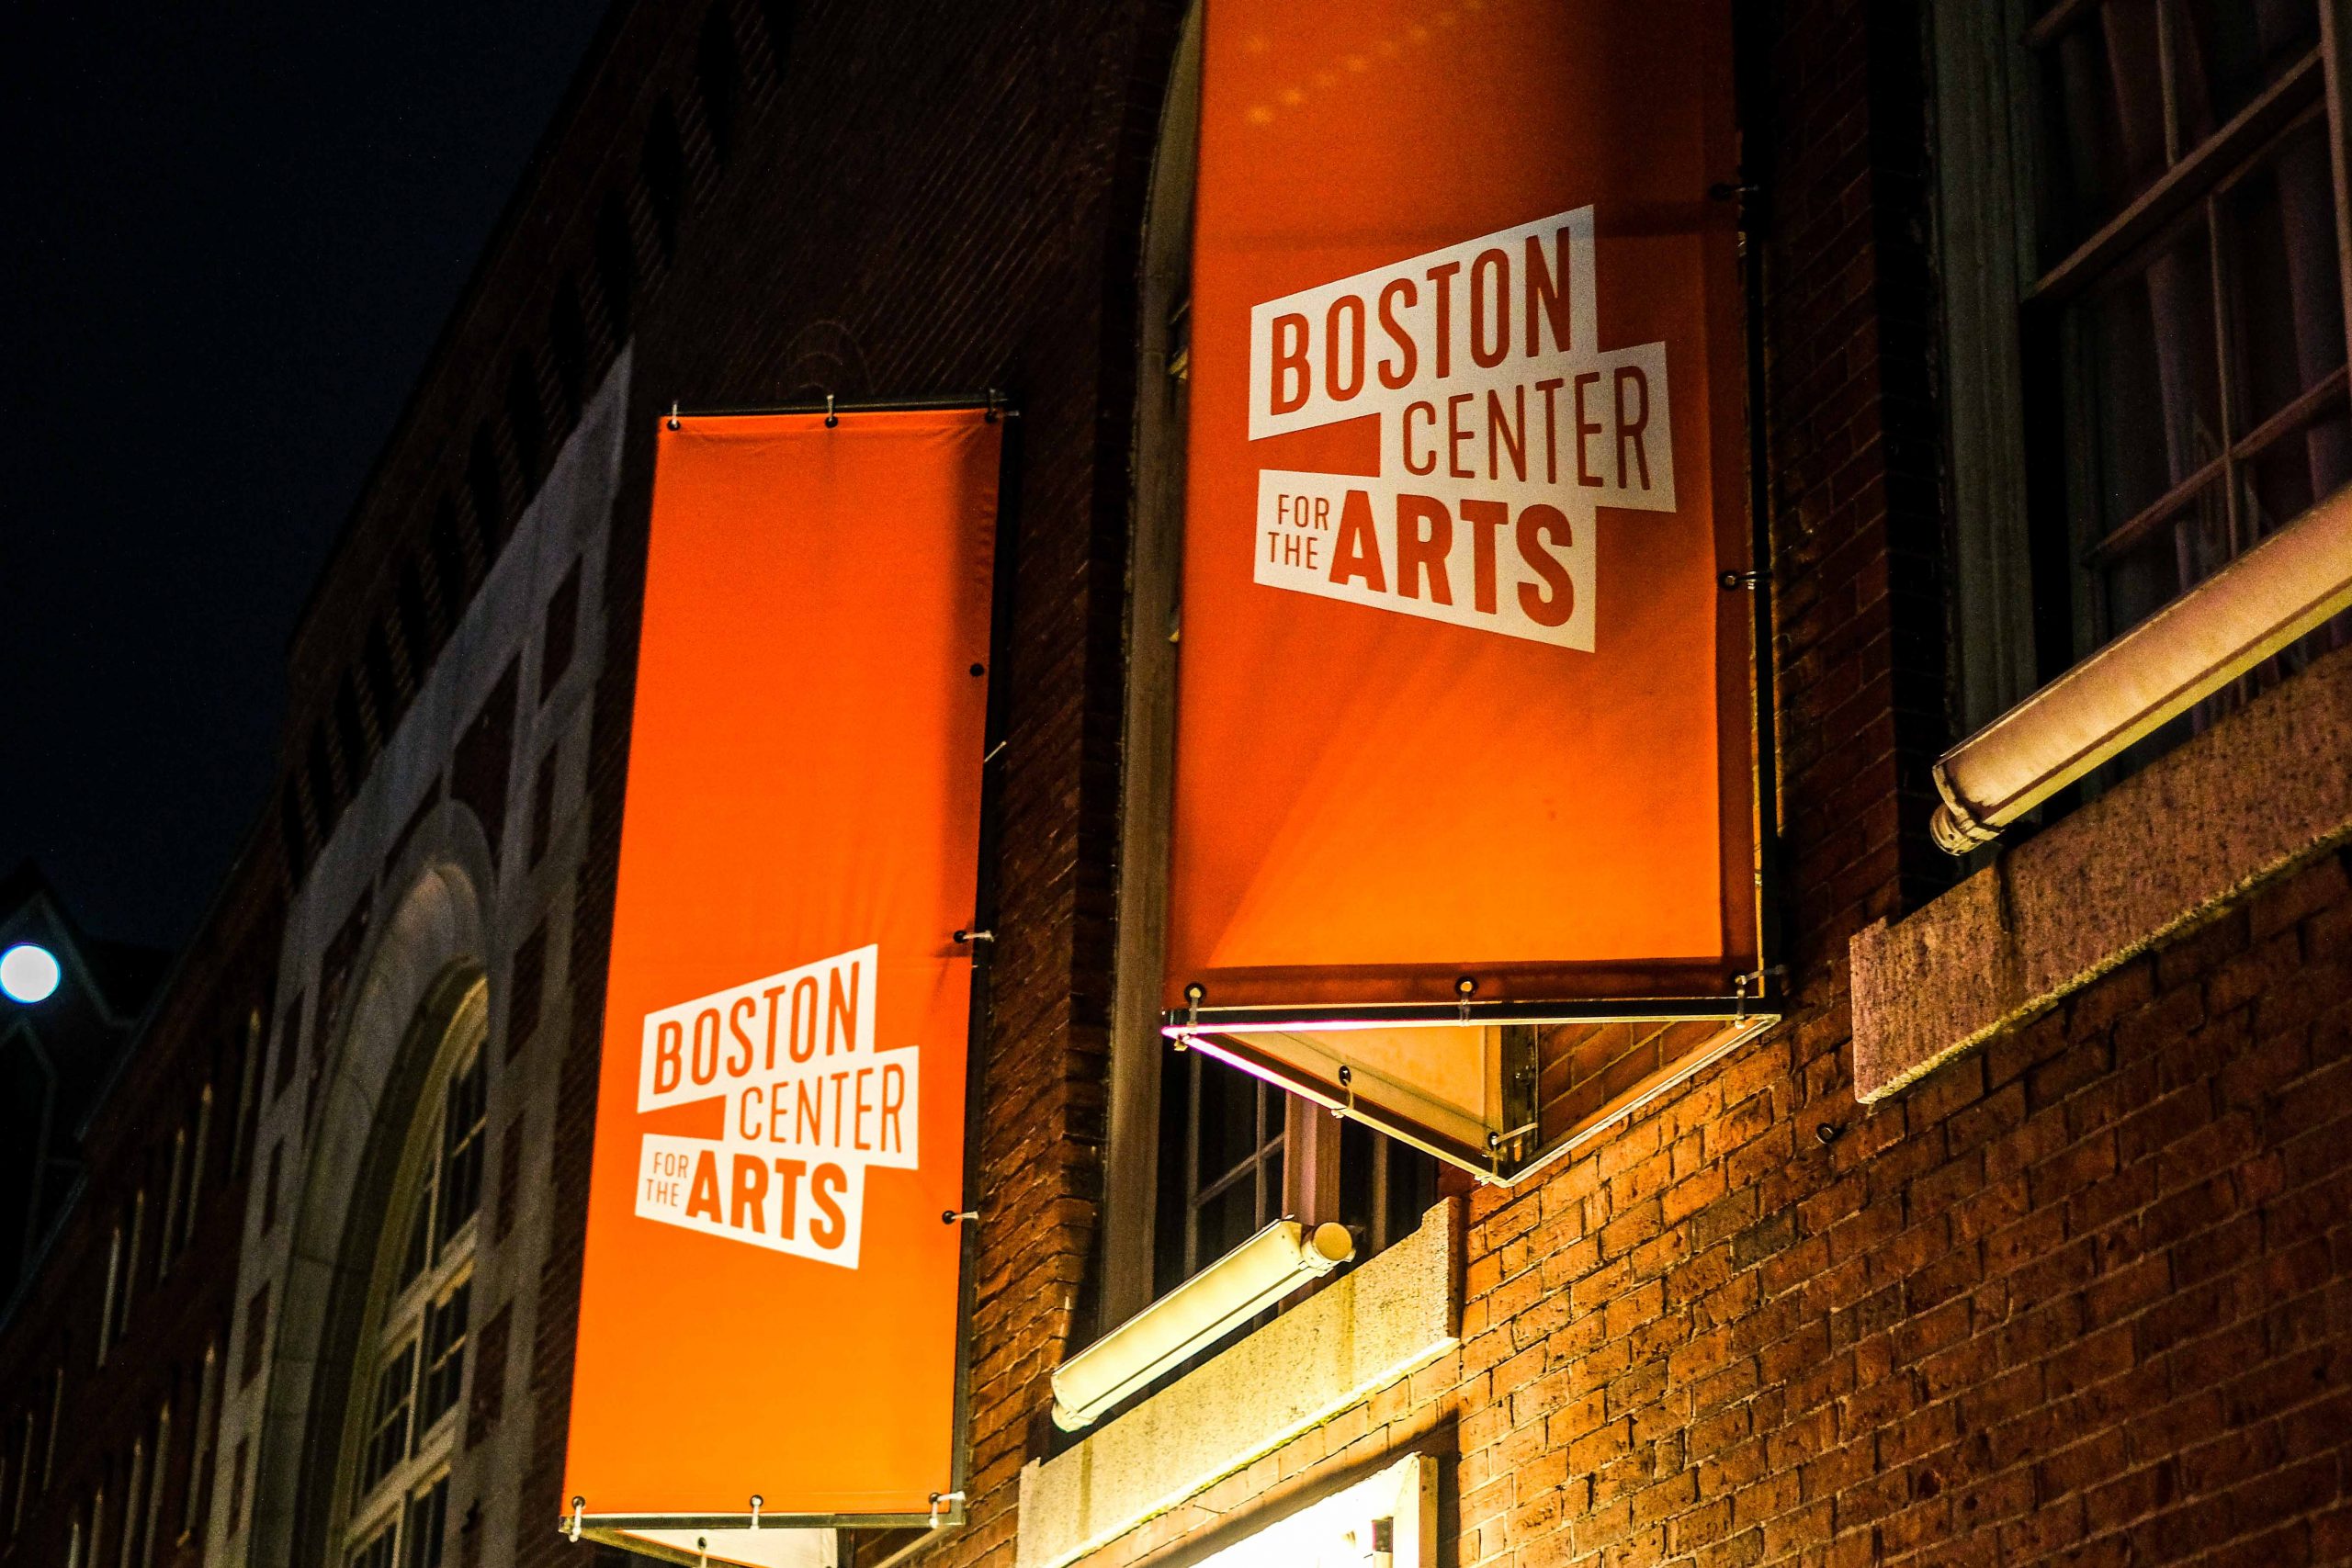 Two signs on the side of building that say "Boston Center for the Arts."